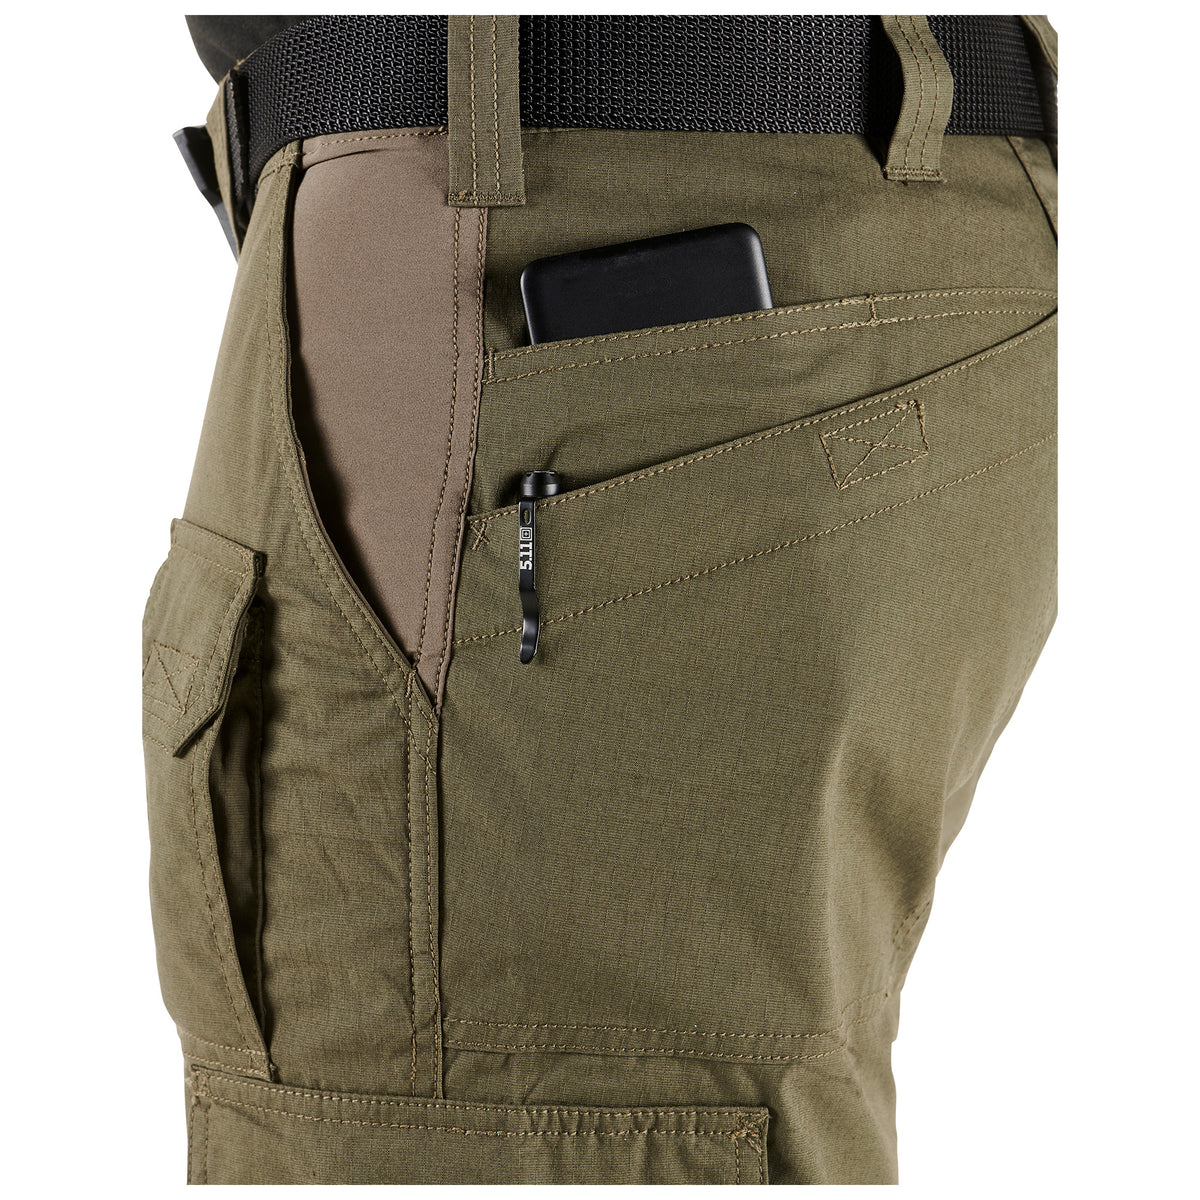 5.11® Tactical Men&#39;s ABR™ Pro Ripstop Tactical Pant_Ranger Green - Work World - Workwear, Work Boots, Safety Gear